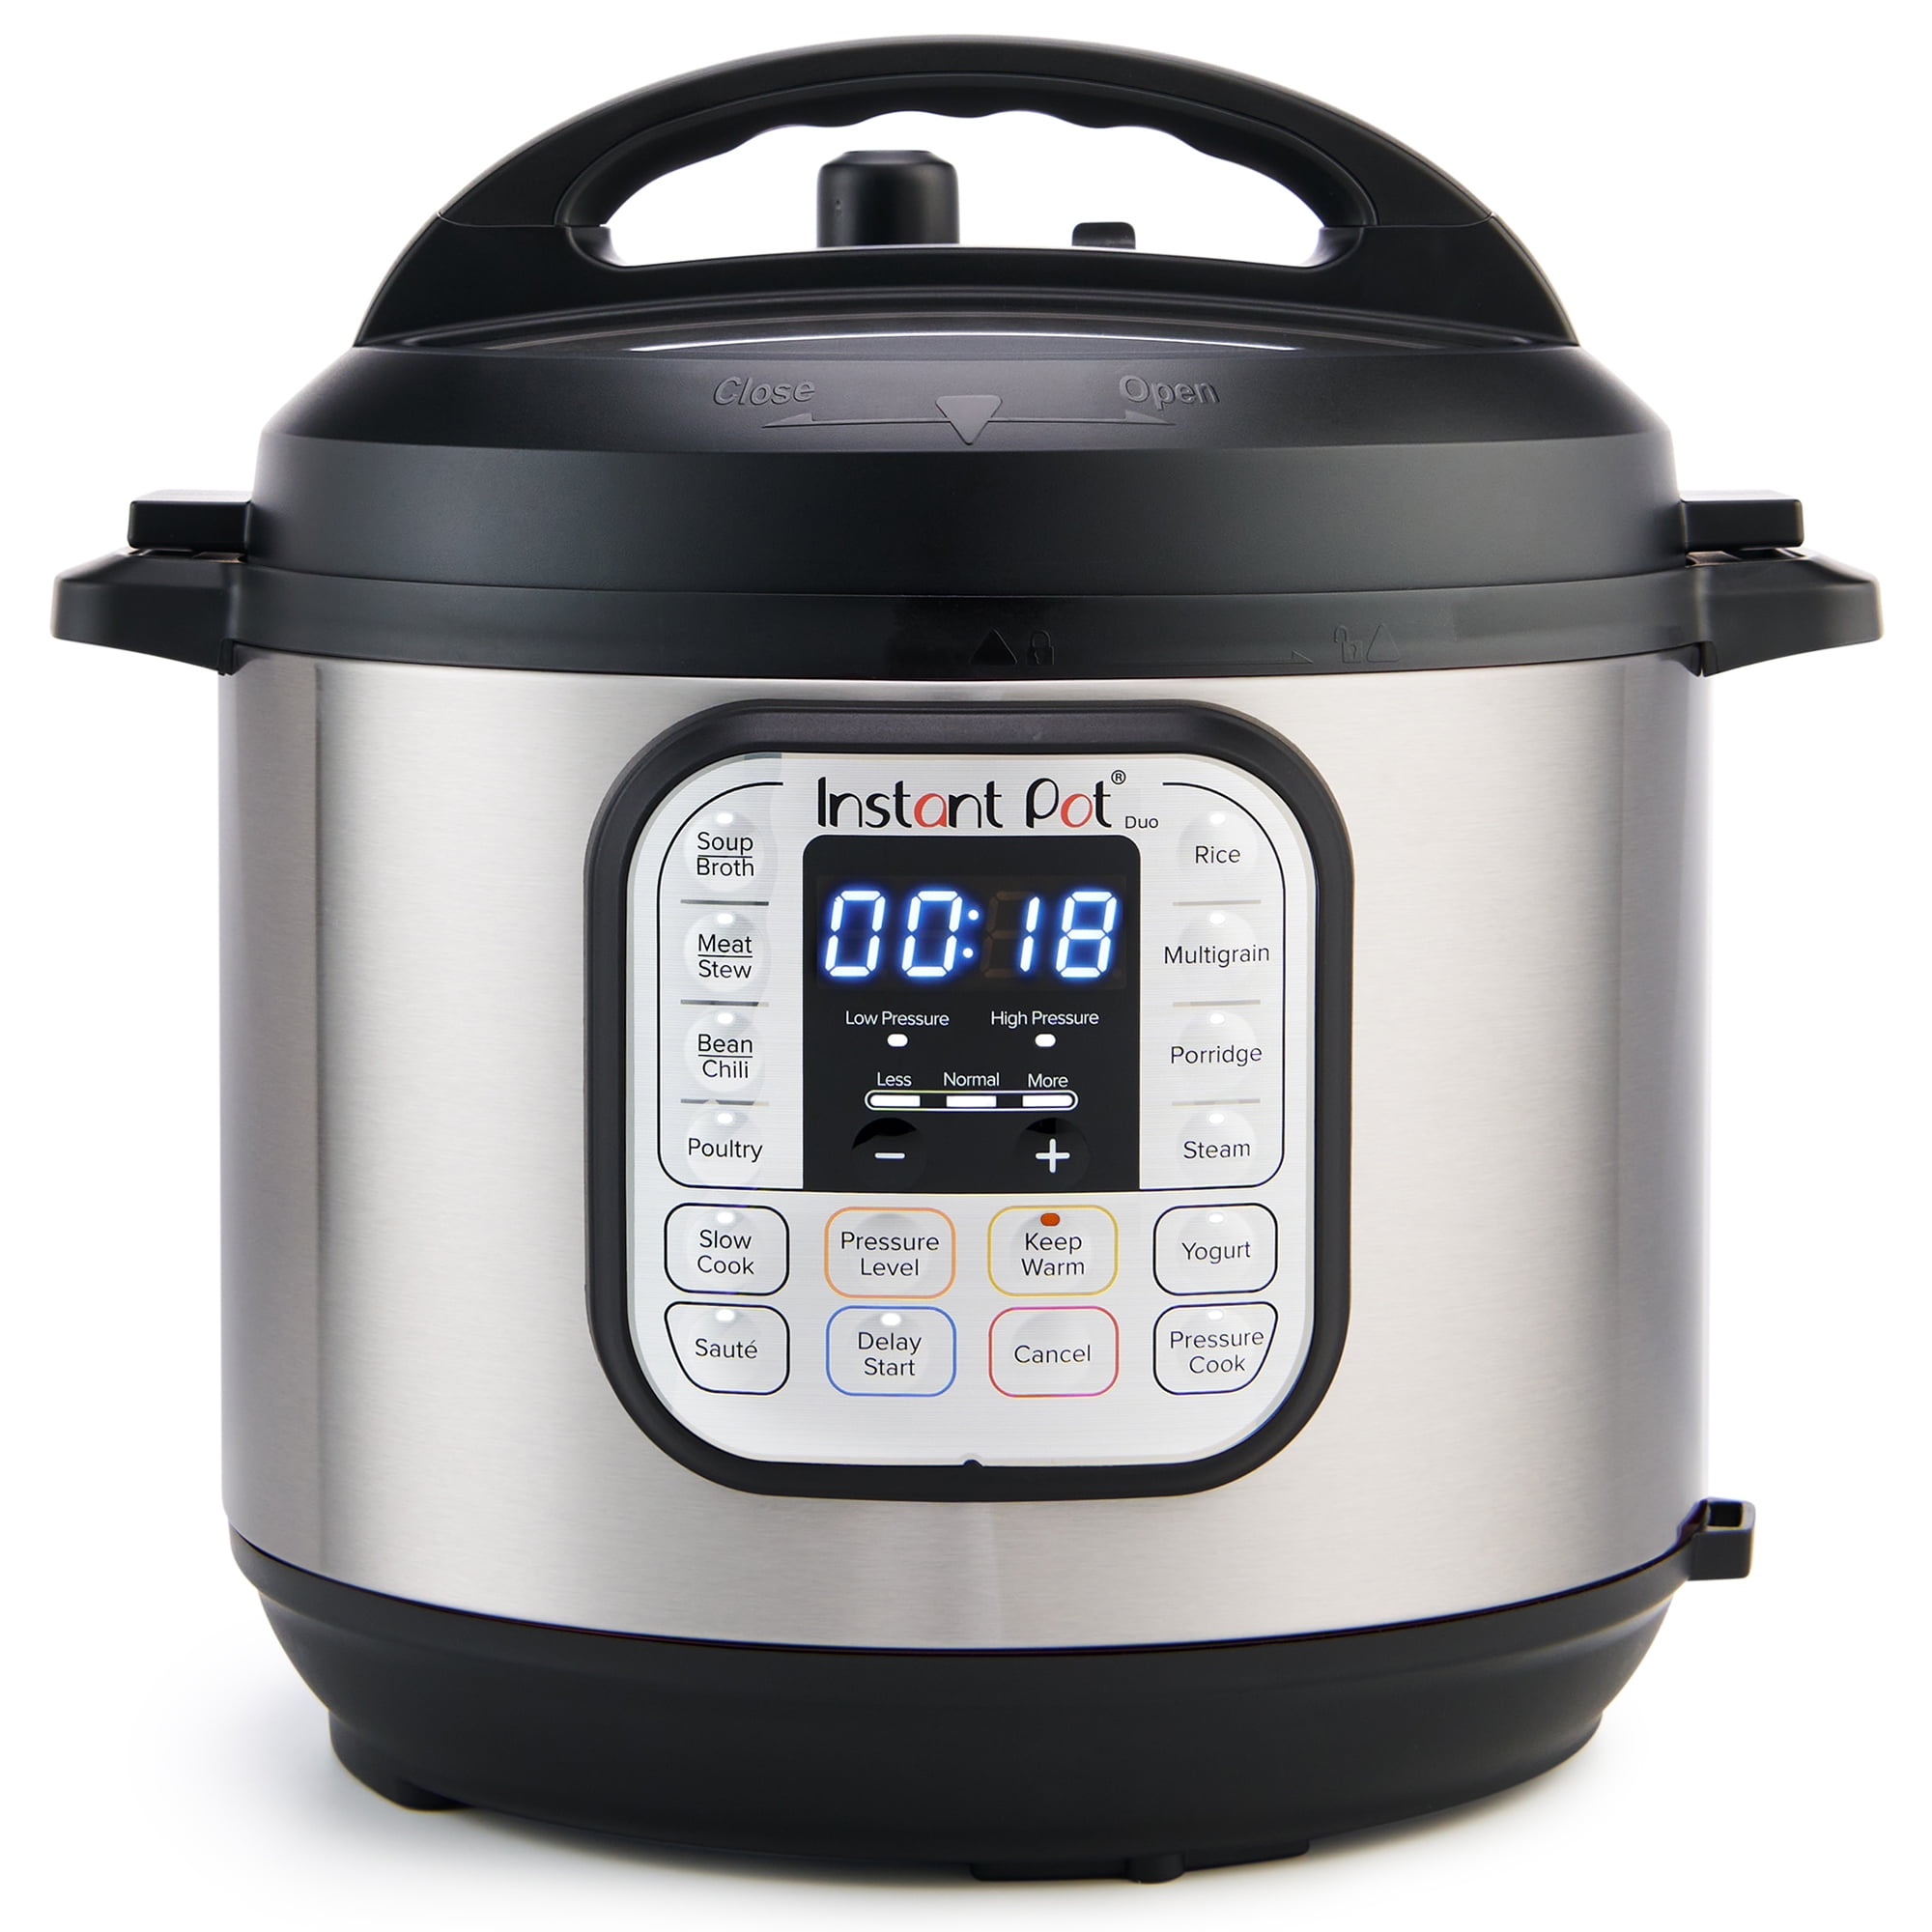 Instant Pot Duo 7-in-1 Electric Pressure Cooker, Slow Cooker, Rice Cooker, Steamer, Sauté, Yogurt Maker, Warmer & Sterilizer, Includes Free App with over 1900 Recipes, Stainless Steel, 8 Quart